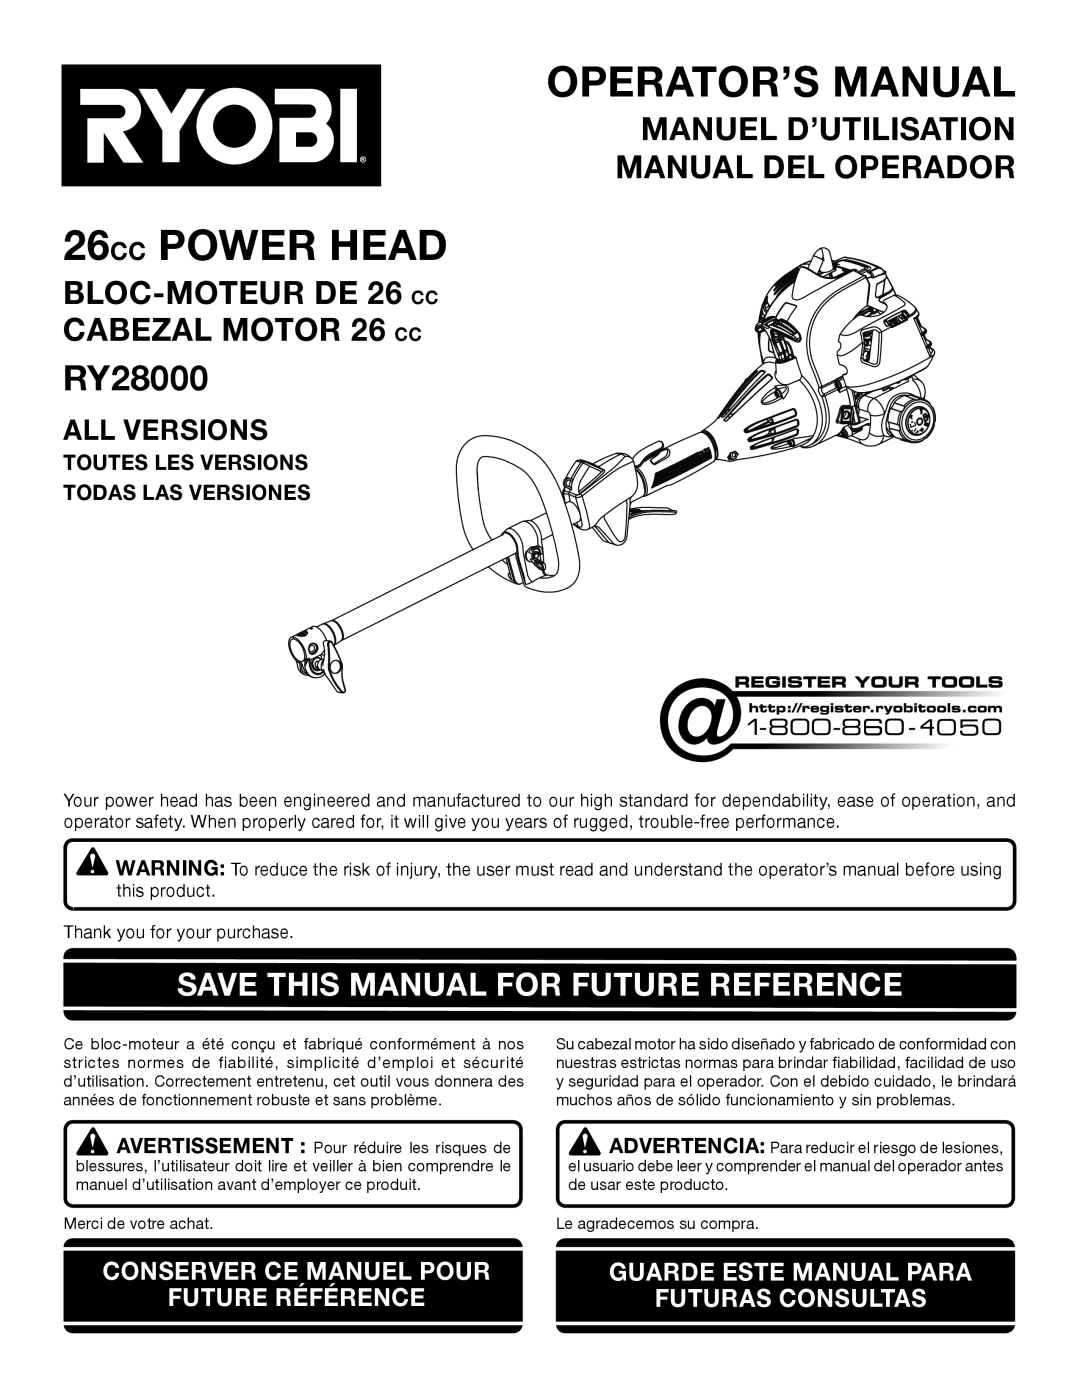 Ryobi RY28000 manuel dutilisation Save This Manual For Future Reference, All Versions, Operator’S Manual, 26CC POWER HEAD 